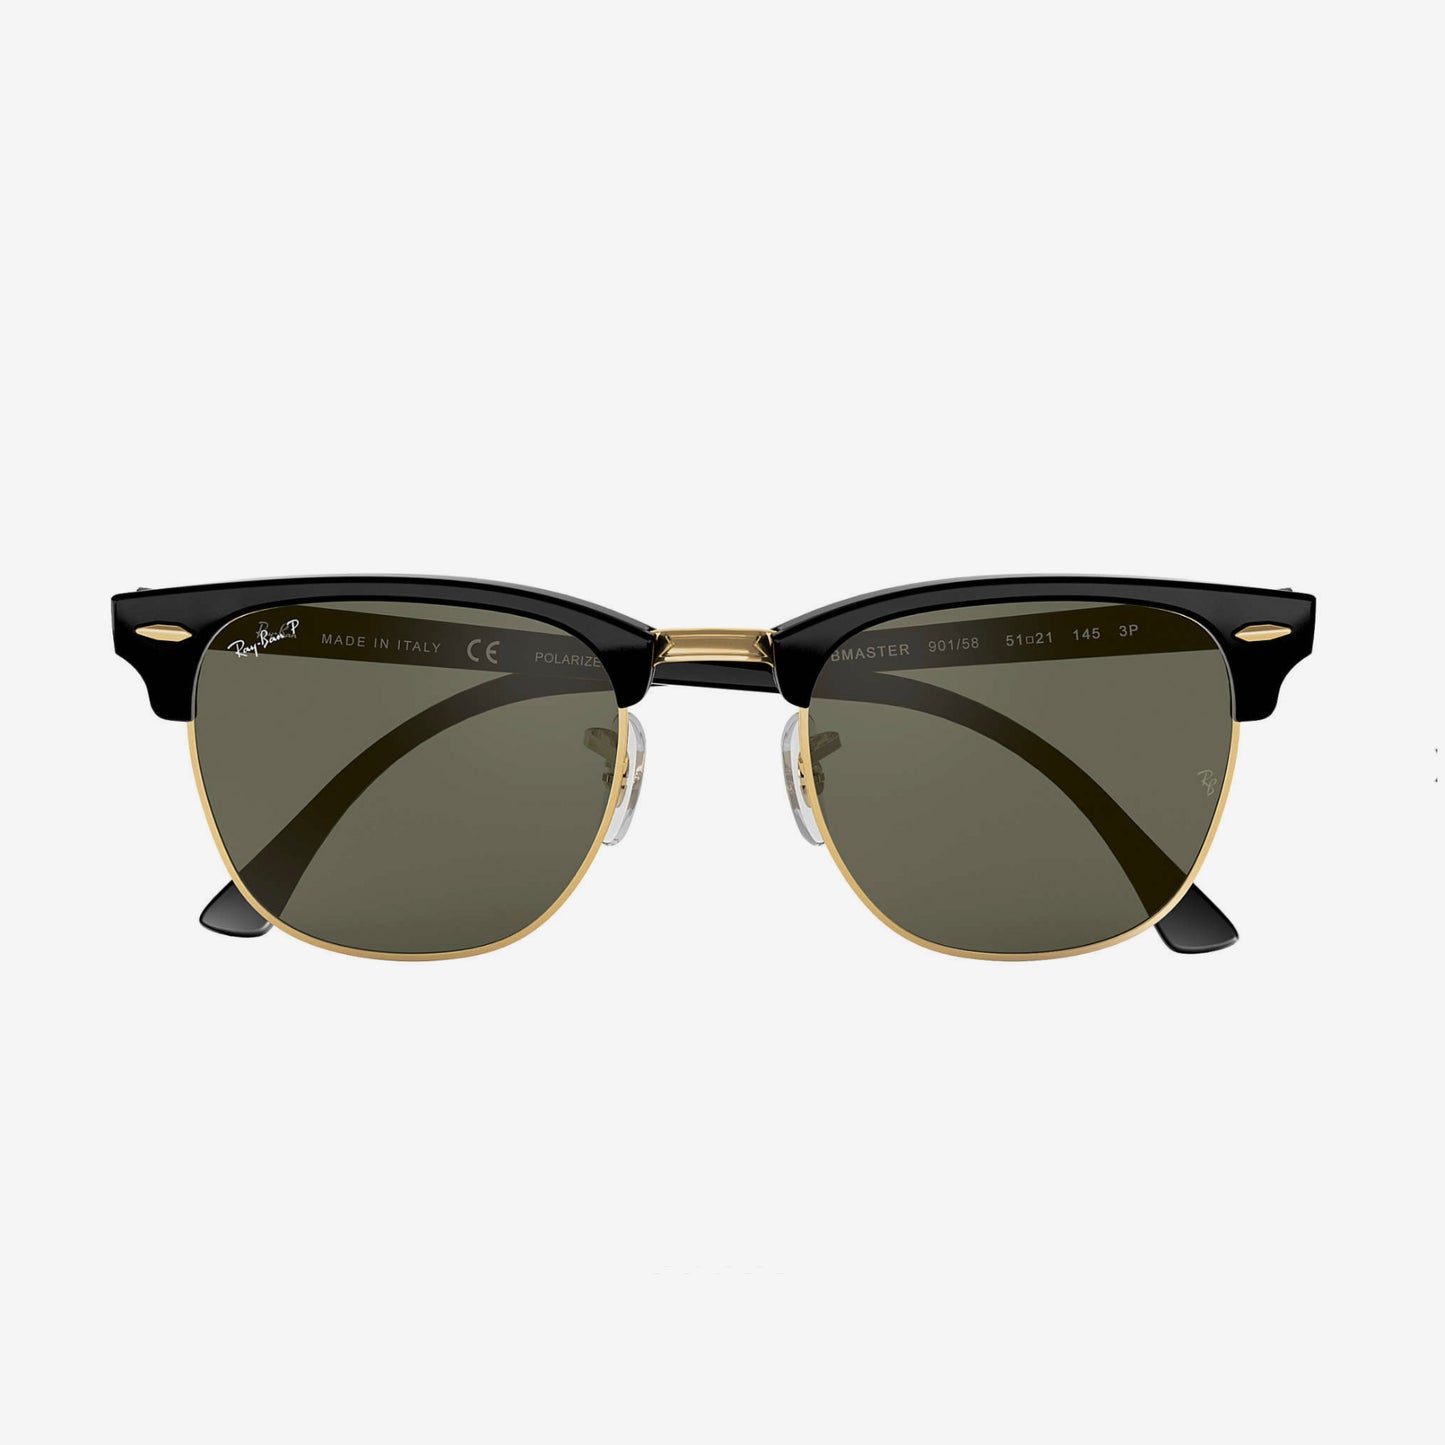 Ray-Ban - Clubmaster Classic - Black Frame / Green Lens [RB3016] - 49